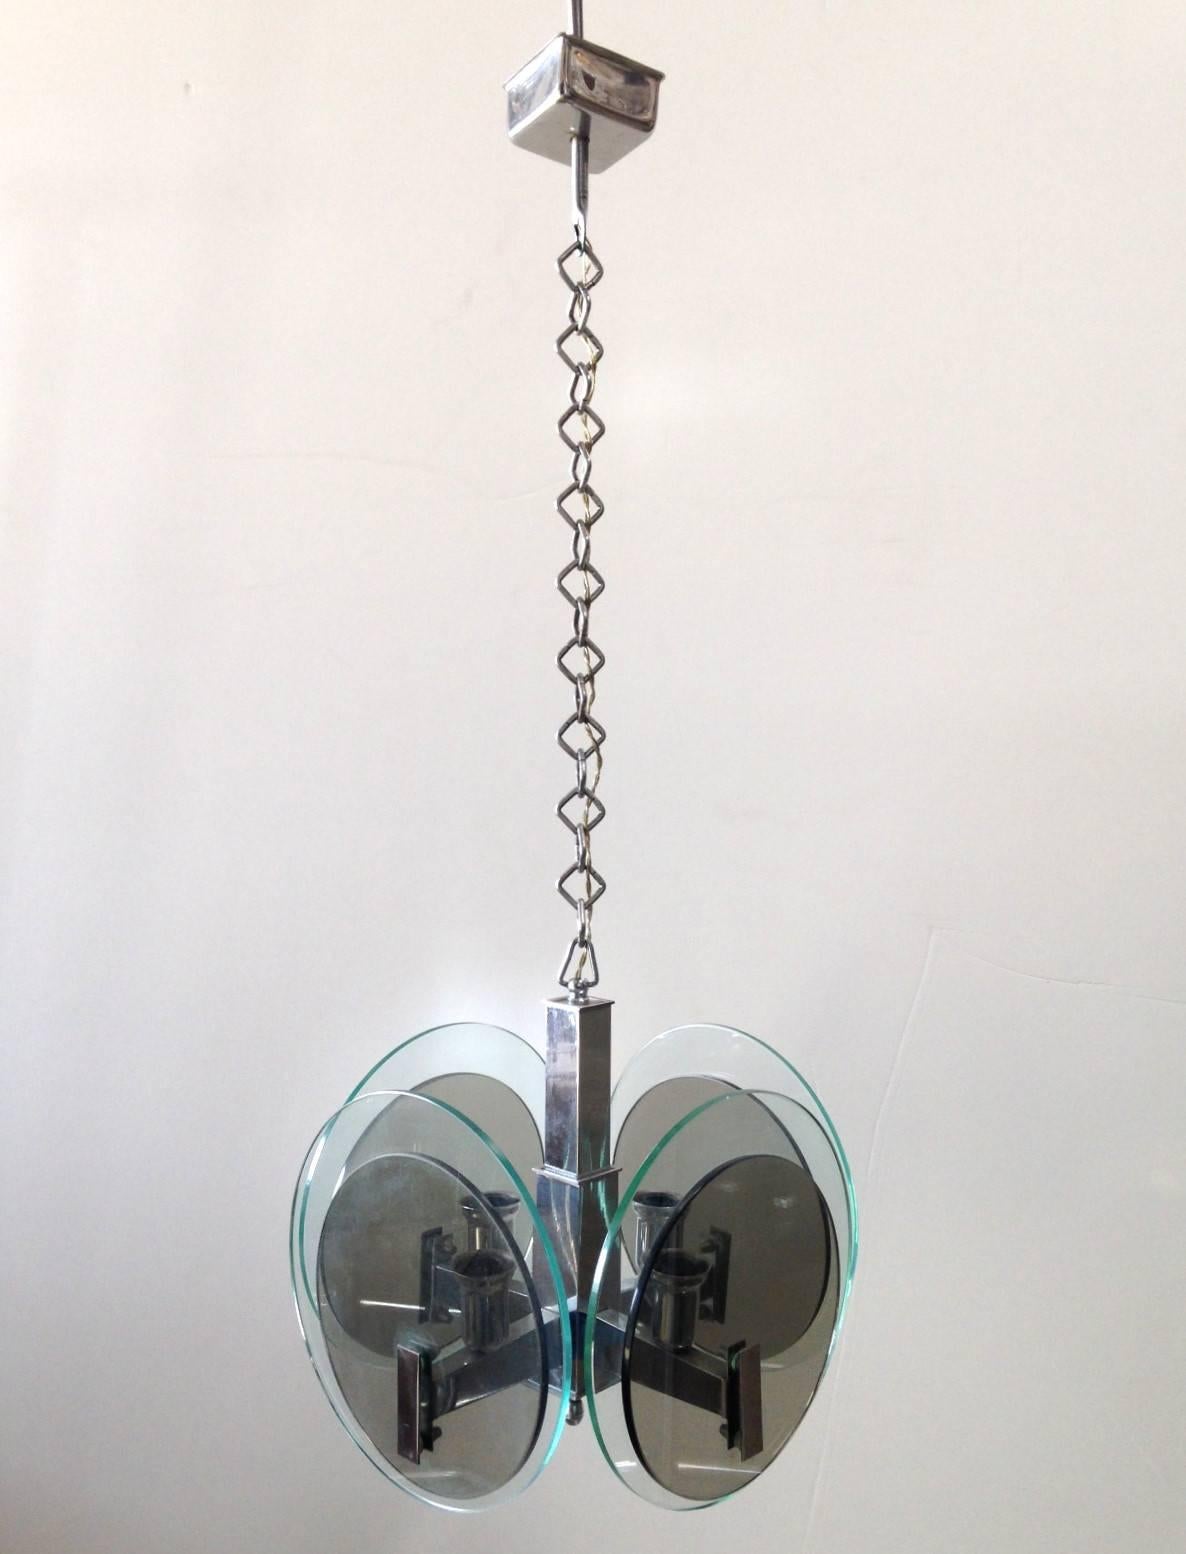 Vintage Italian pendant with smoky and clear glass disks layered on chrome frame / Designed by Cristal Art circa 1960’s / Made in Italy
4 lights / E12 or E14 type / max 40W each
Diameter: 11 inches / Height: 10 inches plus chain and canopy
1 in